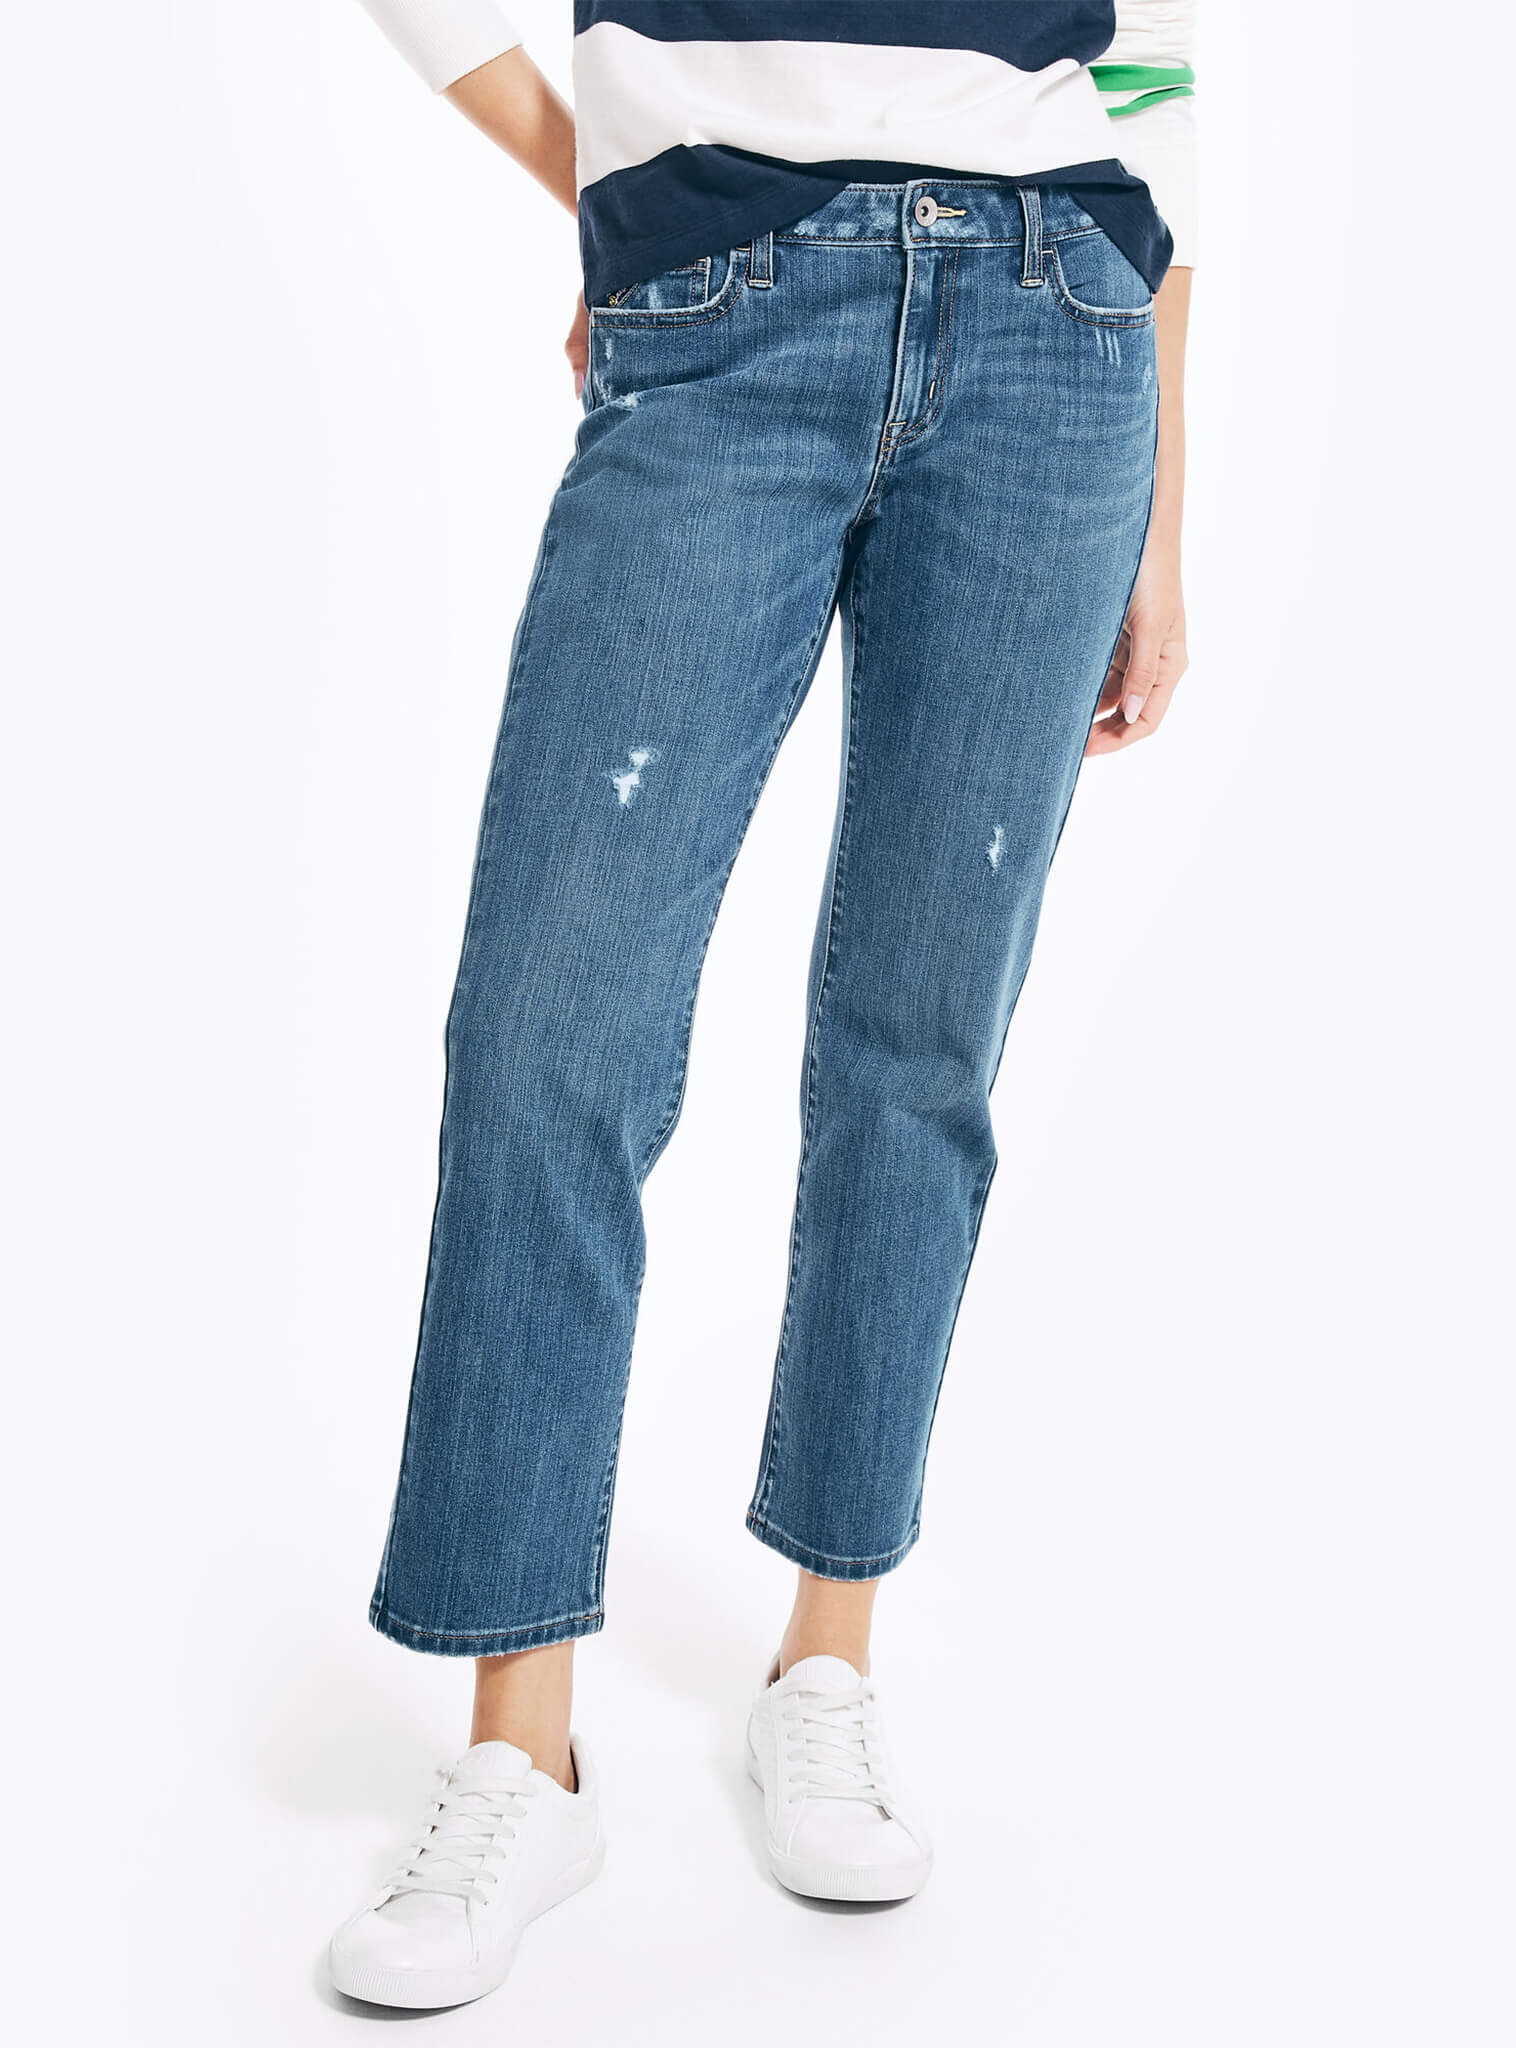 Jeans Tiro Medio Recto Sustaibly Crafted Mujer